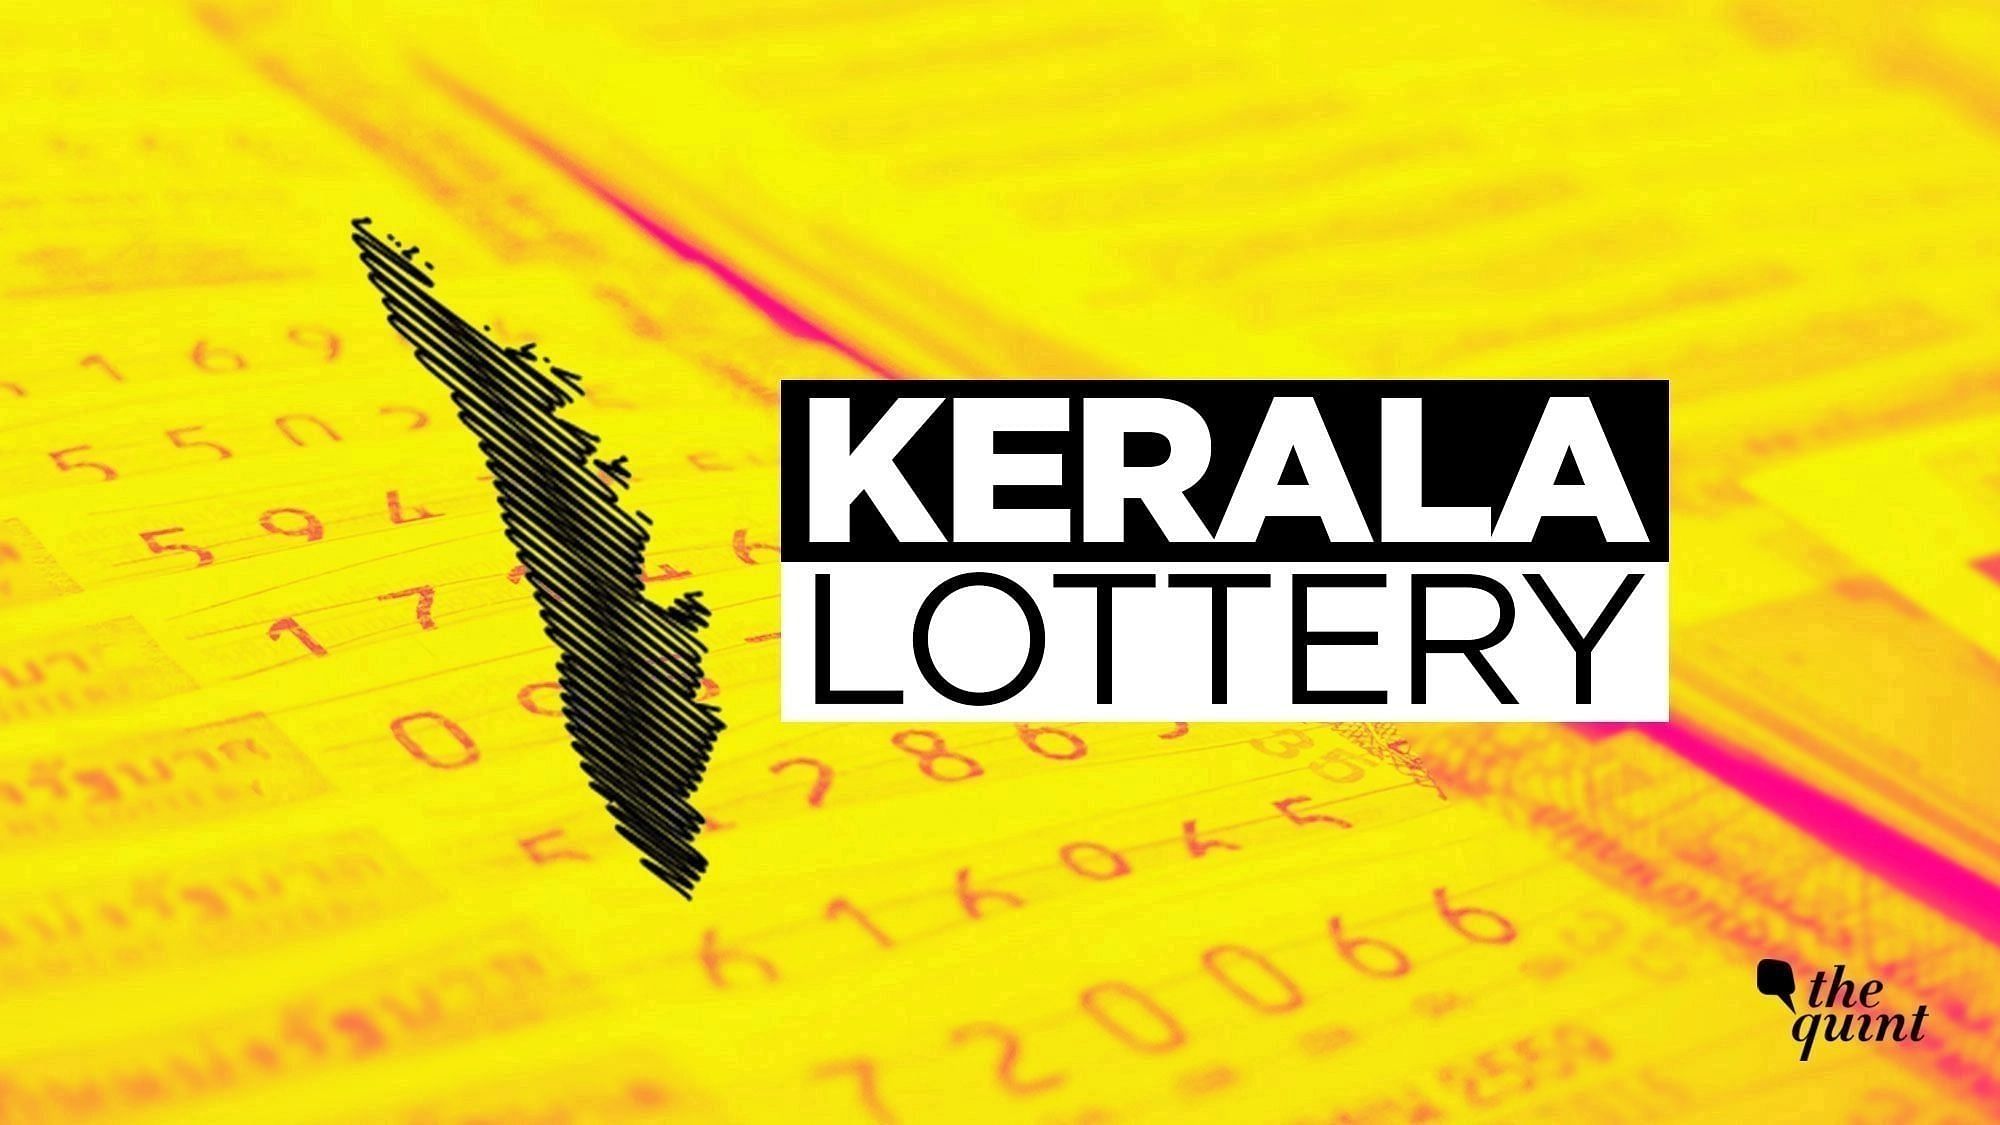 <div class="paragraphs"><p>Here are the prize money details of the Kerala lottery&nbsp;AKSHAYA (AK-571) today, 19 October 2022.</p></div>